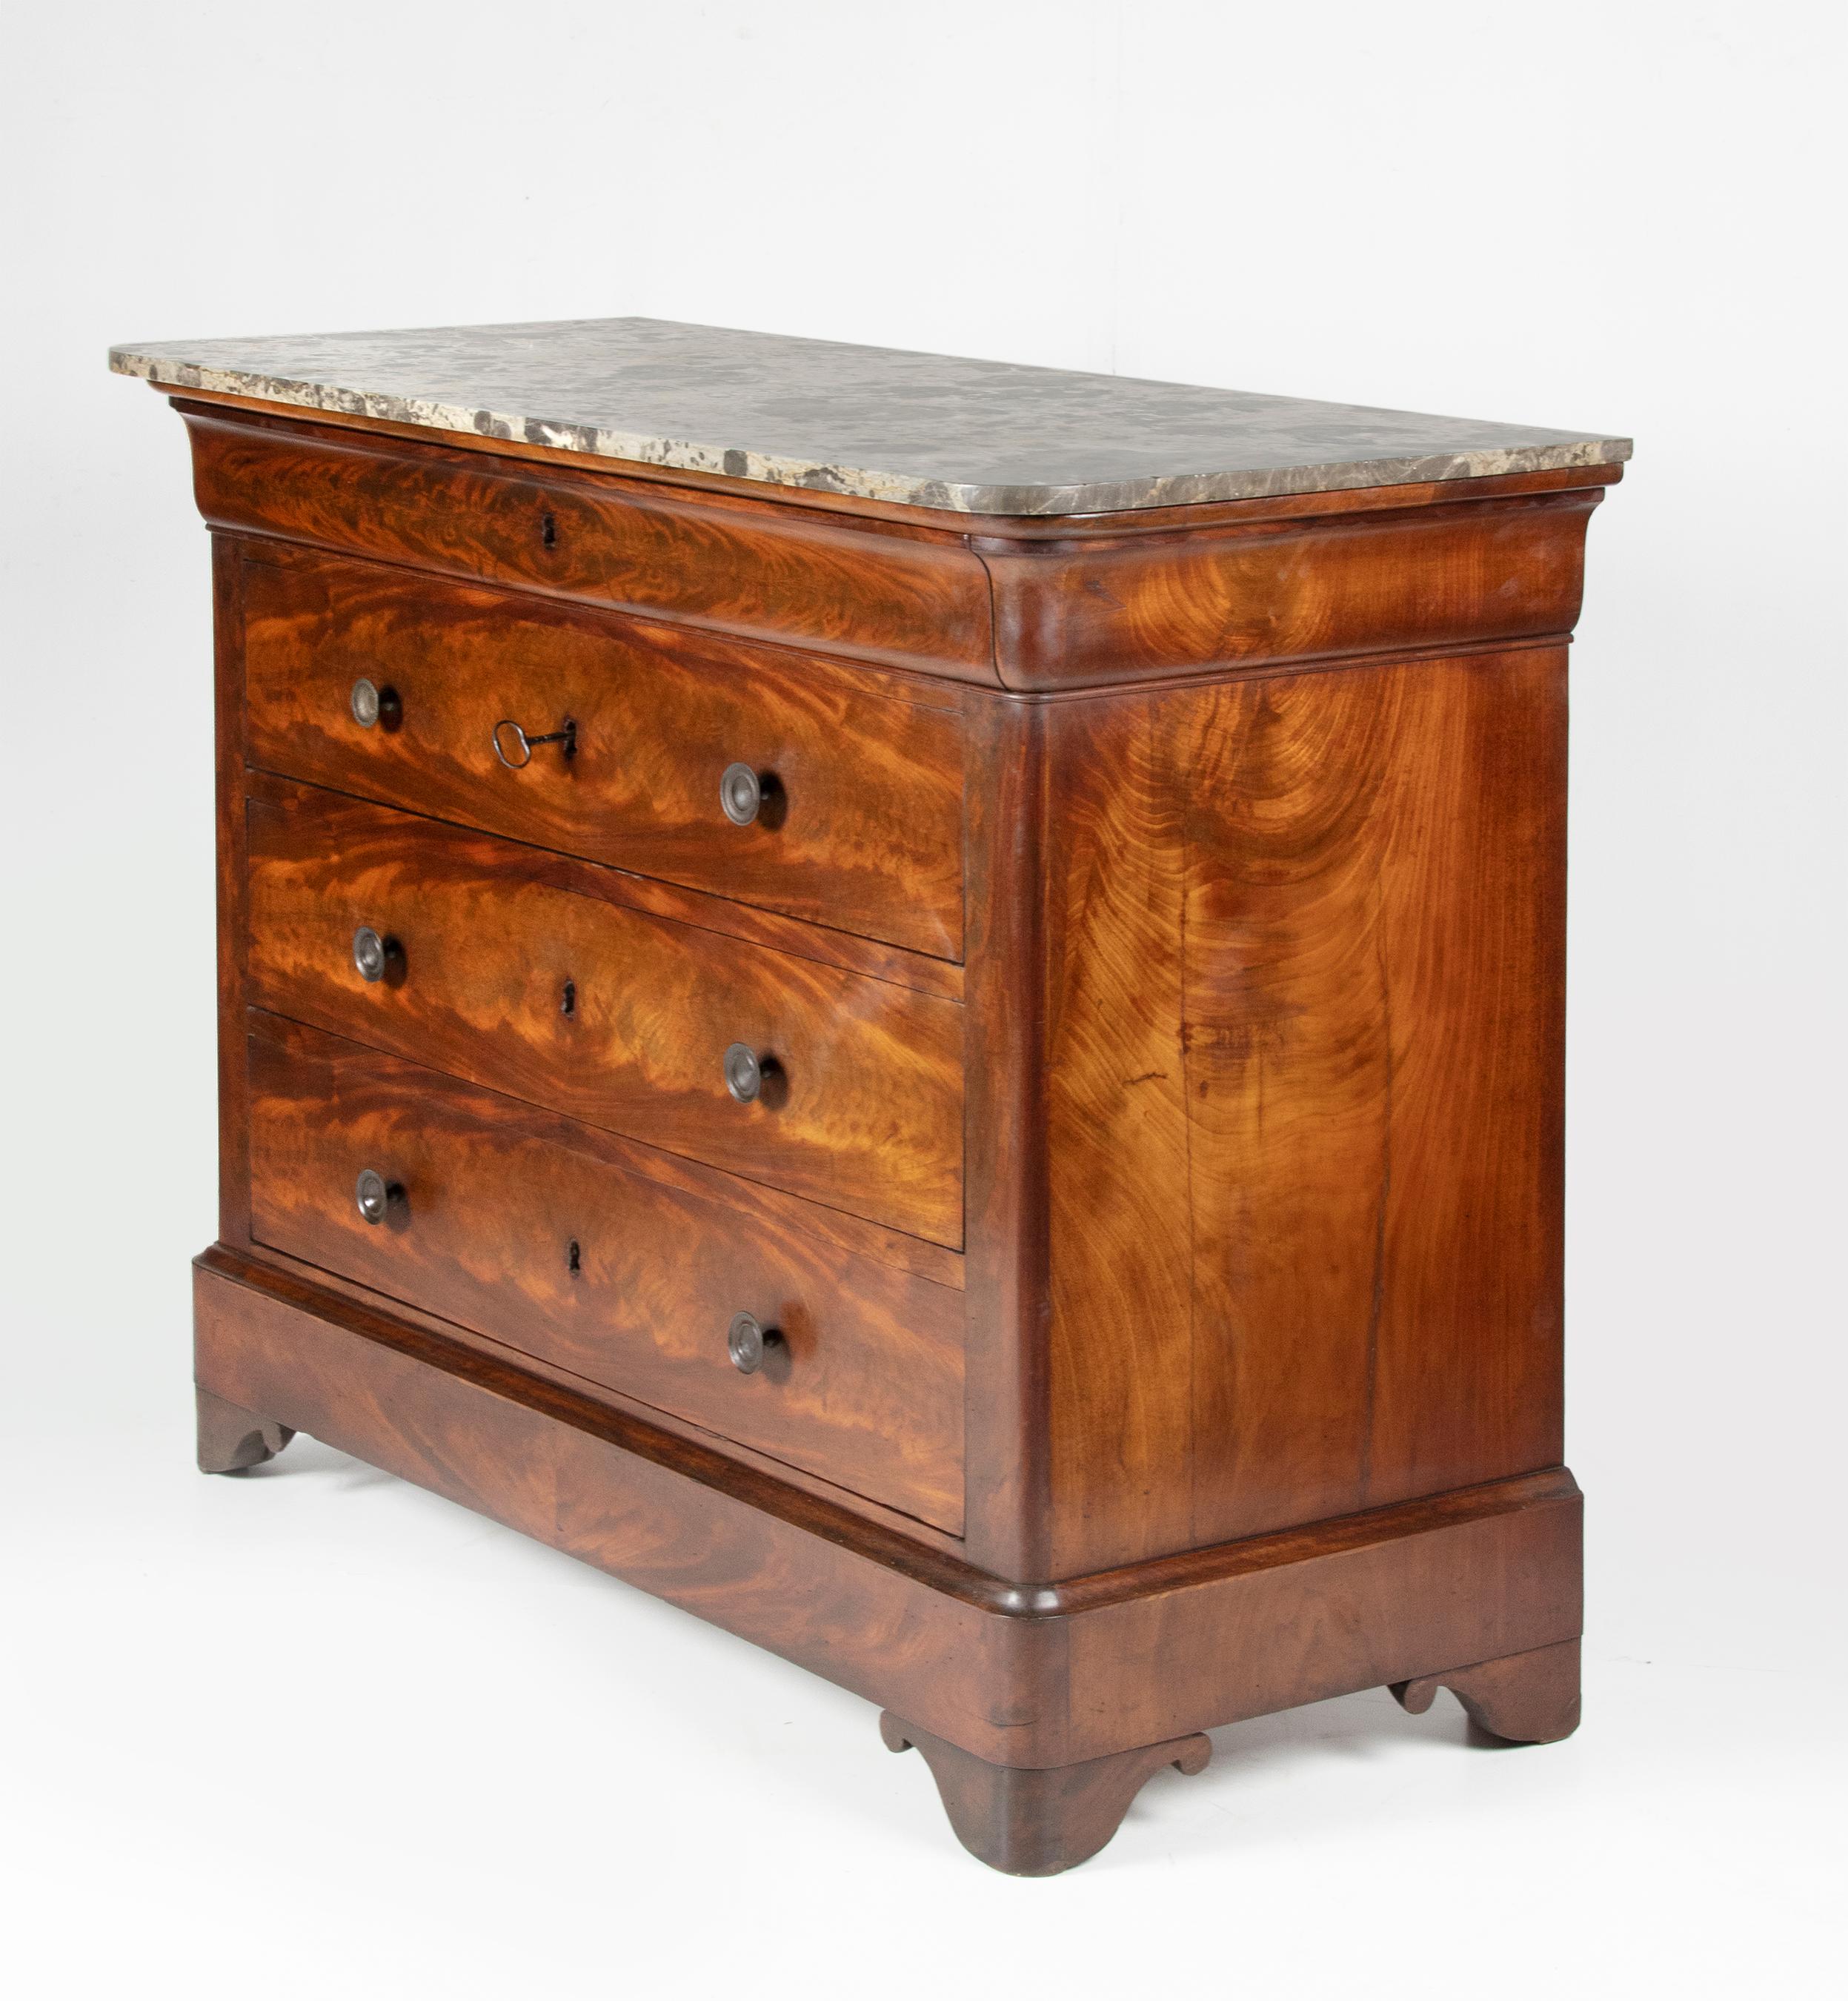 19th century French chest of drawers, commode, mahogany veneered. Louis Philippe style, with grey marble top. 
There is one key with this piece, the key fits on all for drawers.
The back of the furniture has many small woodworm holes. But the